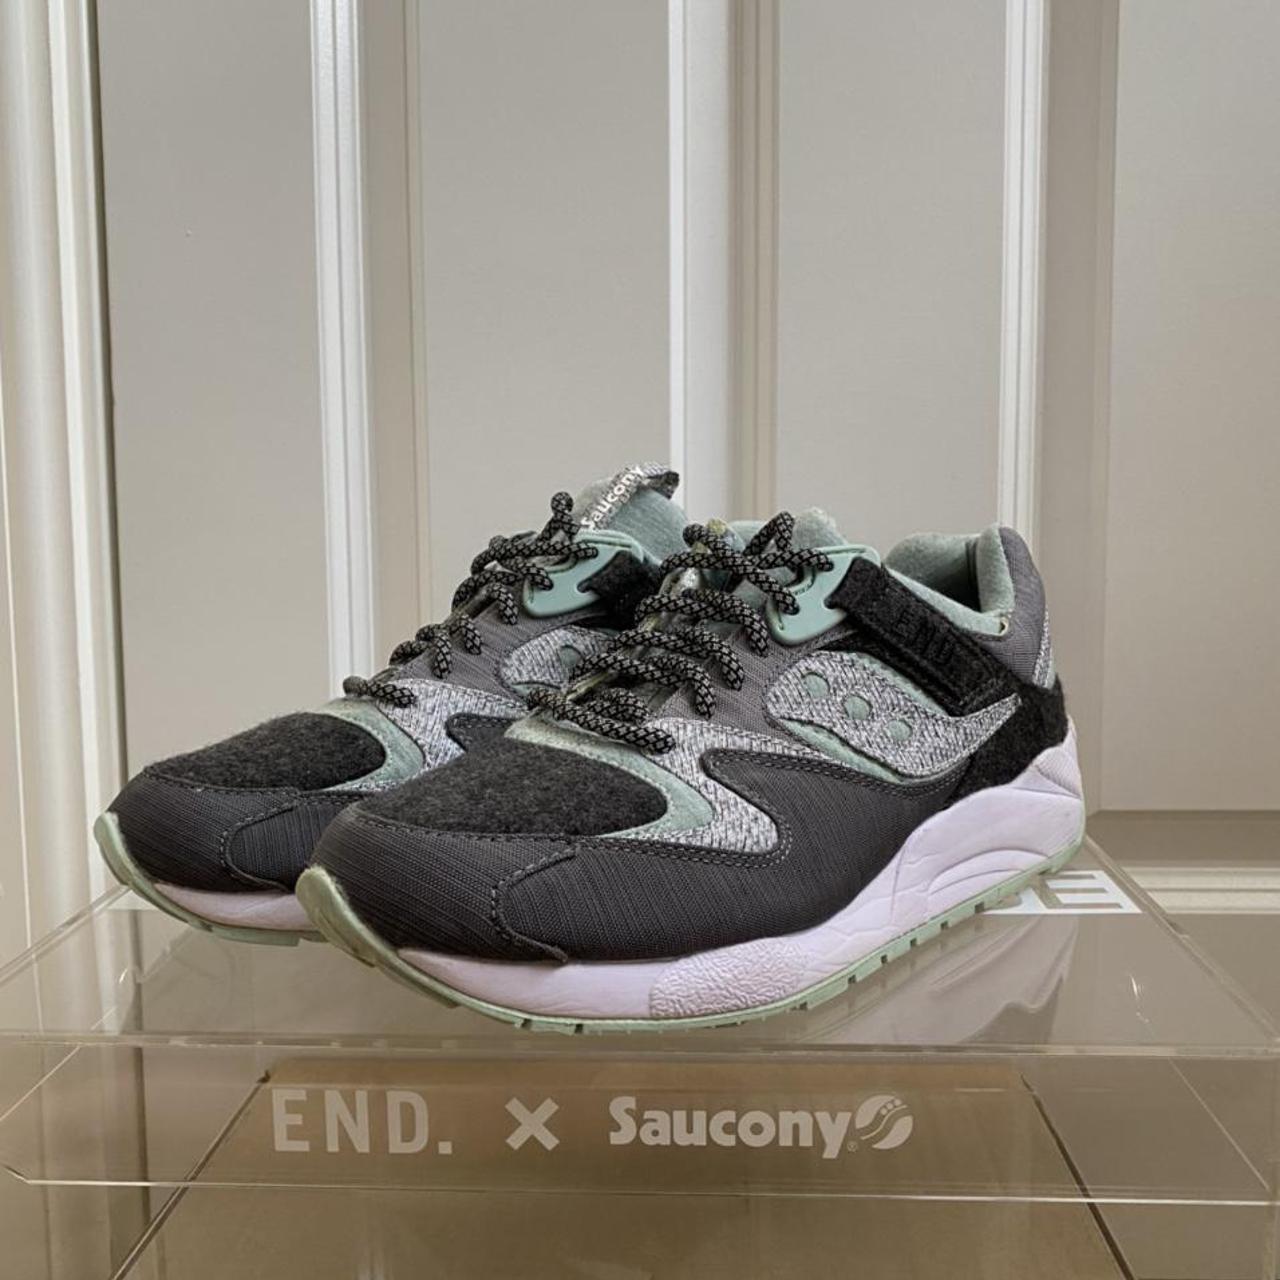 saucony end white noise